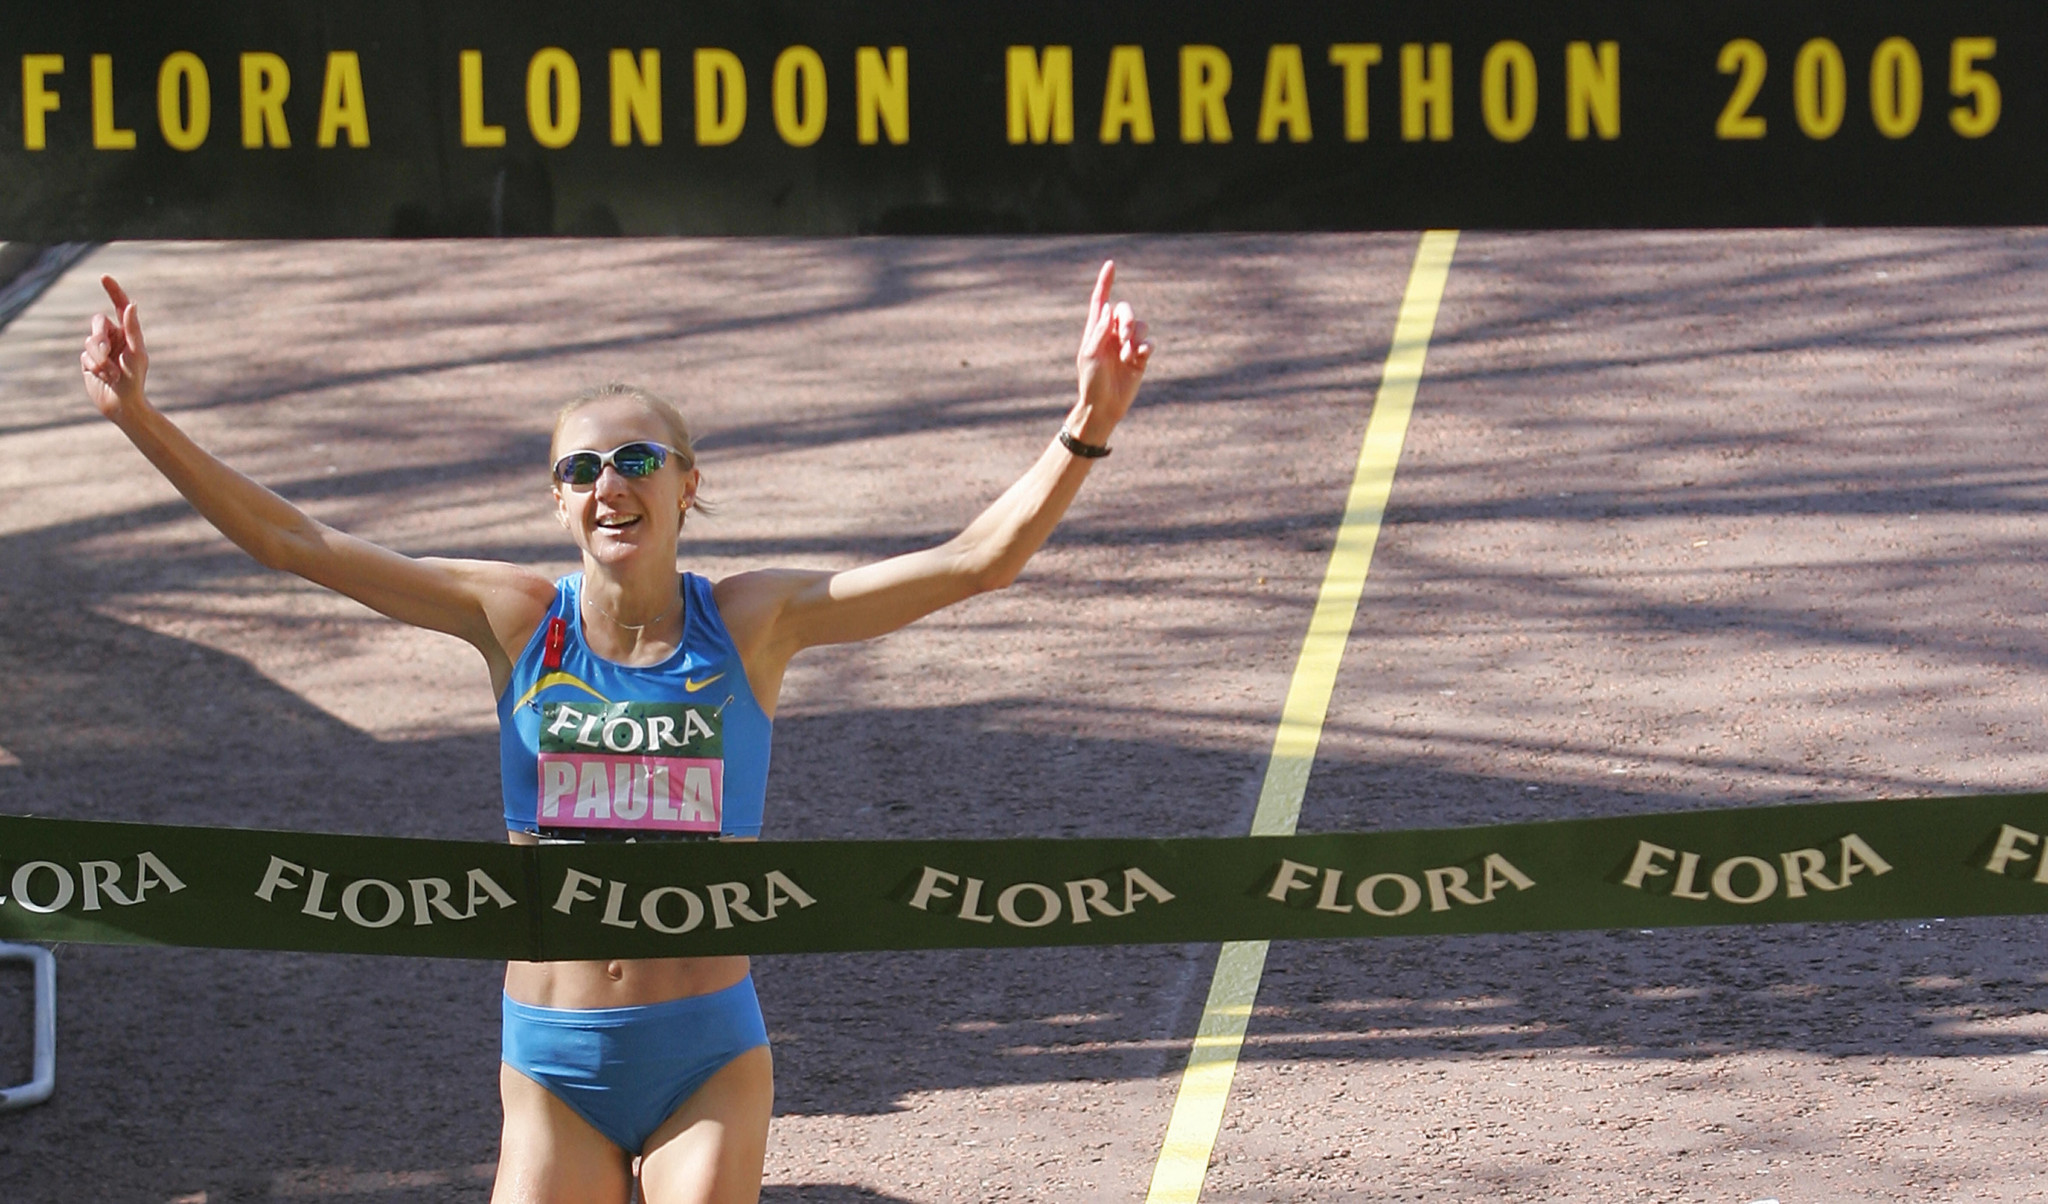 Flora has returned as a sponsor of the London Marathon, with Paula Radcliffe confirmed as an ambassador ©Getty Images